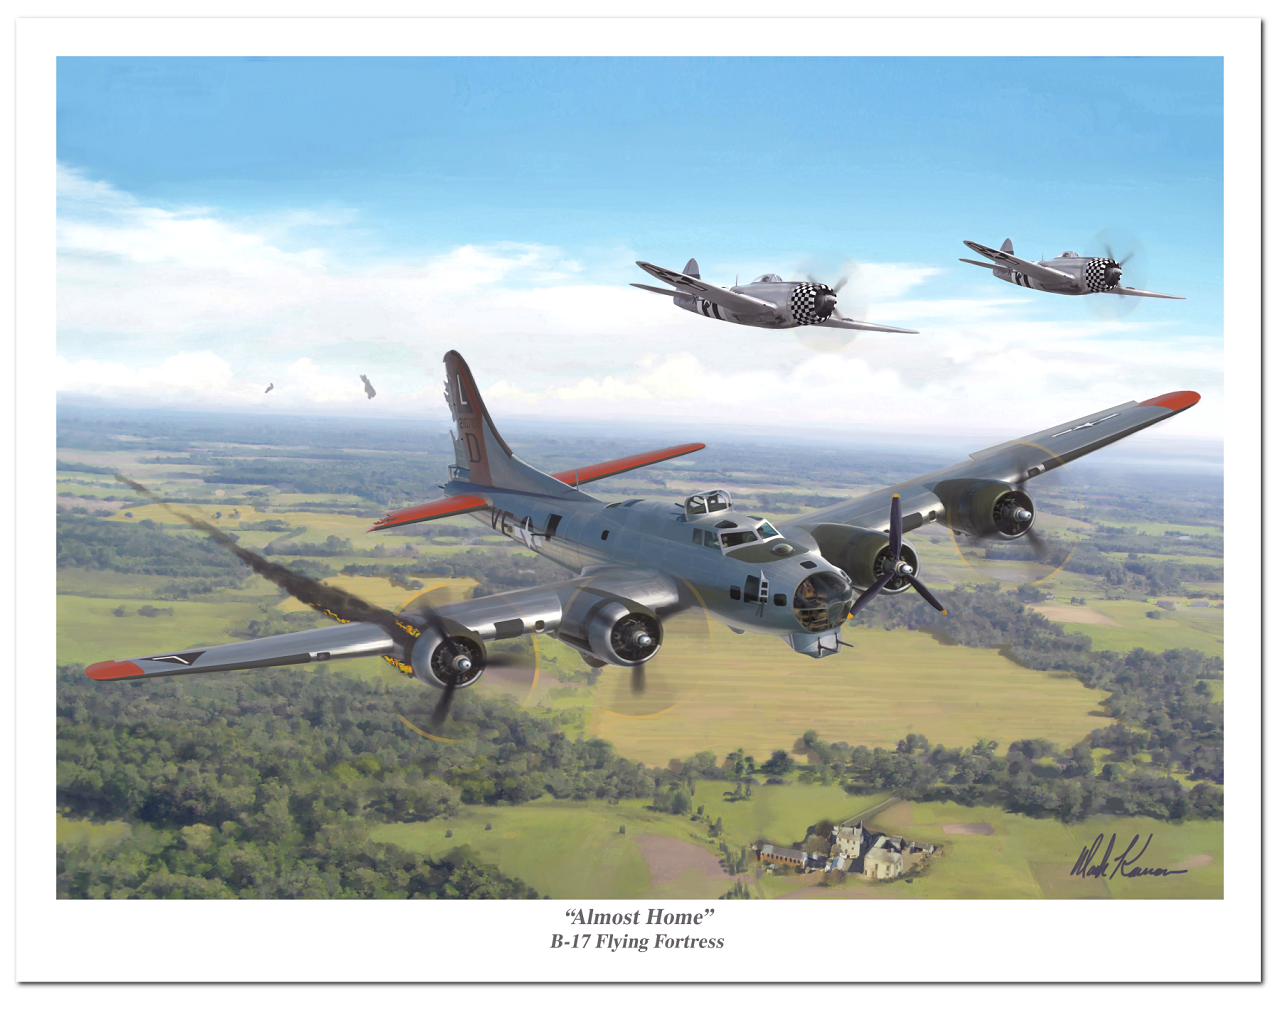 "Almost Home" by Mark Karvon featuring the USAAF B-17 Flying Fortress